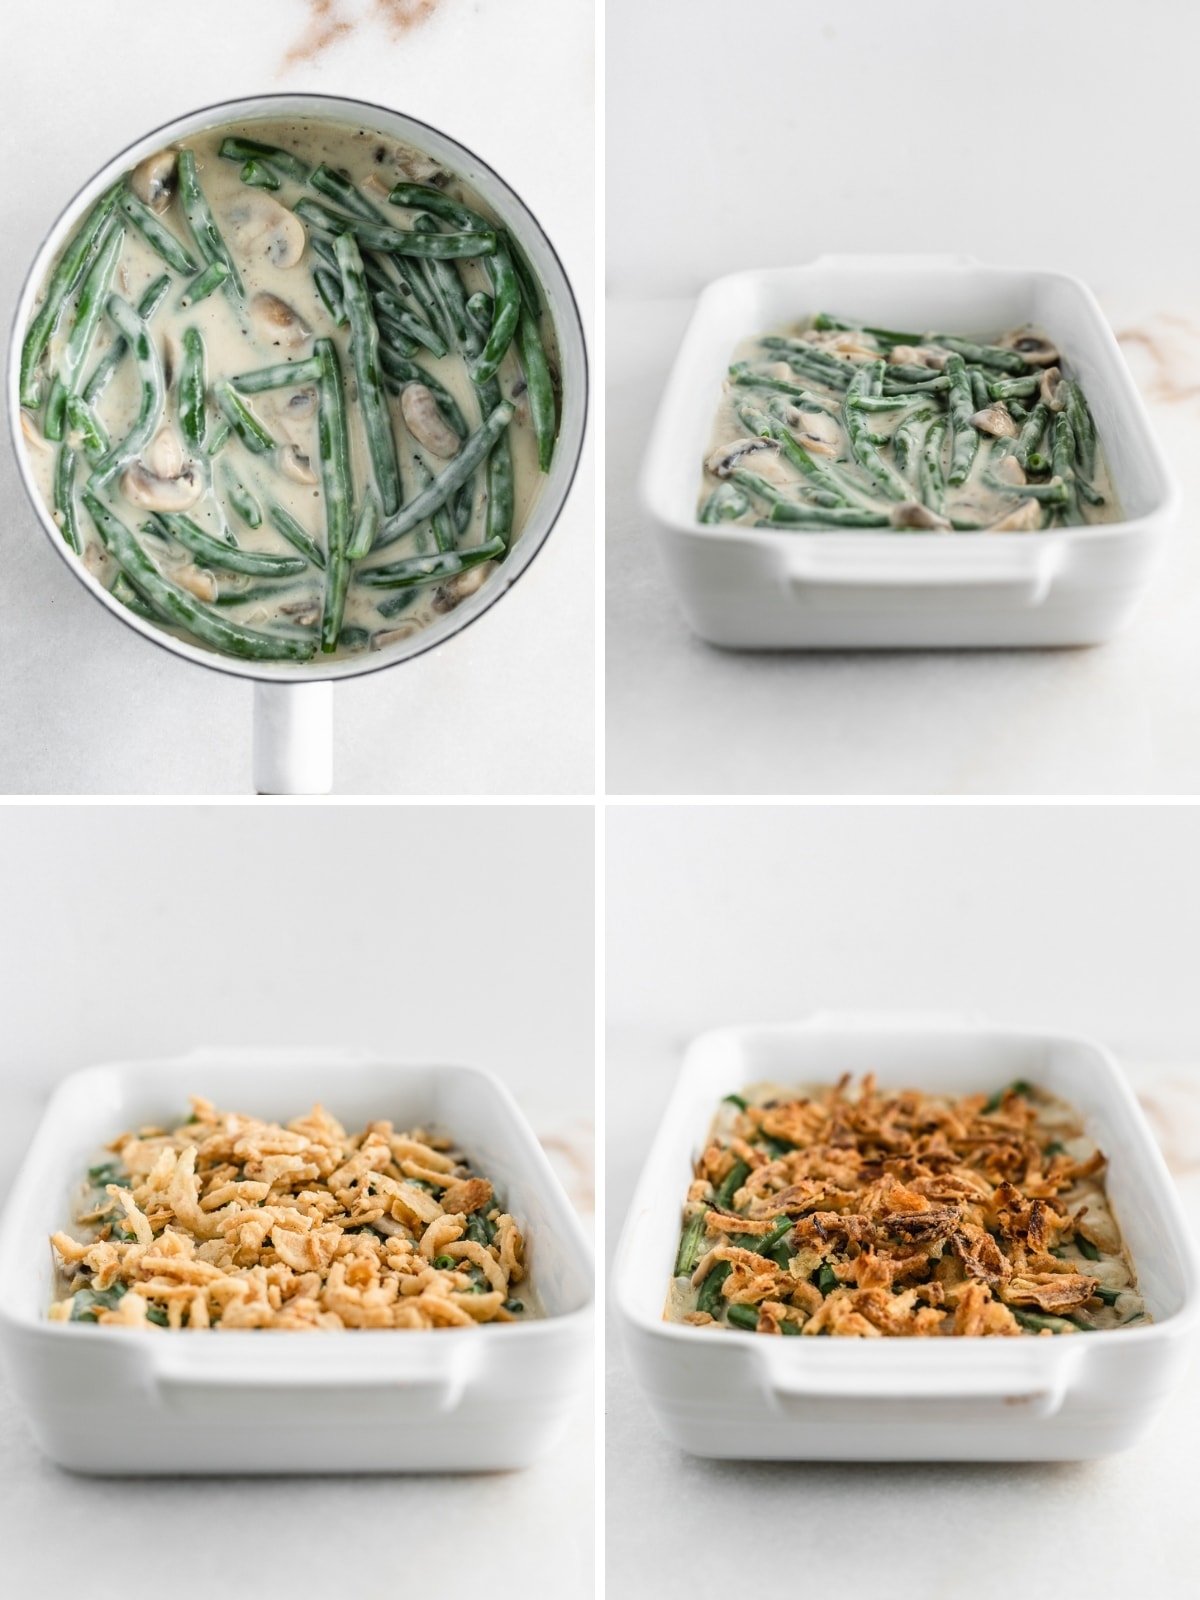 four image collage showing steps for making homemade green bean casserole.